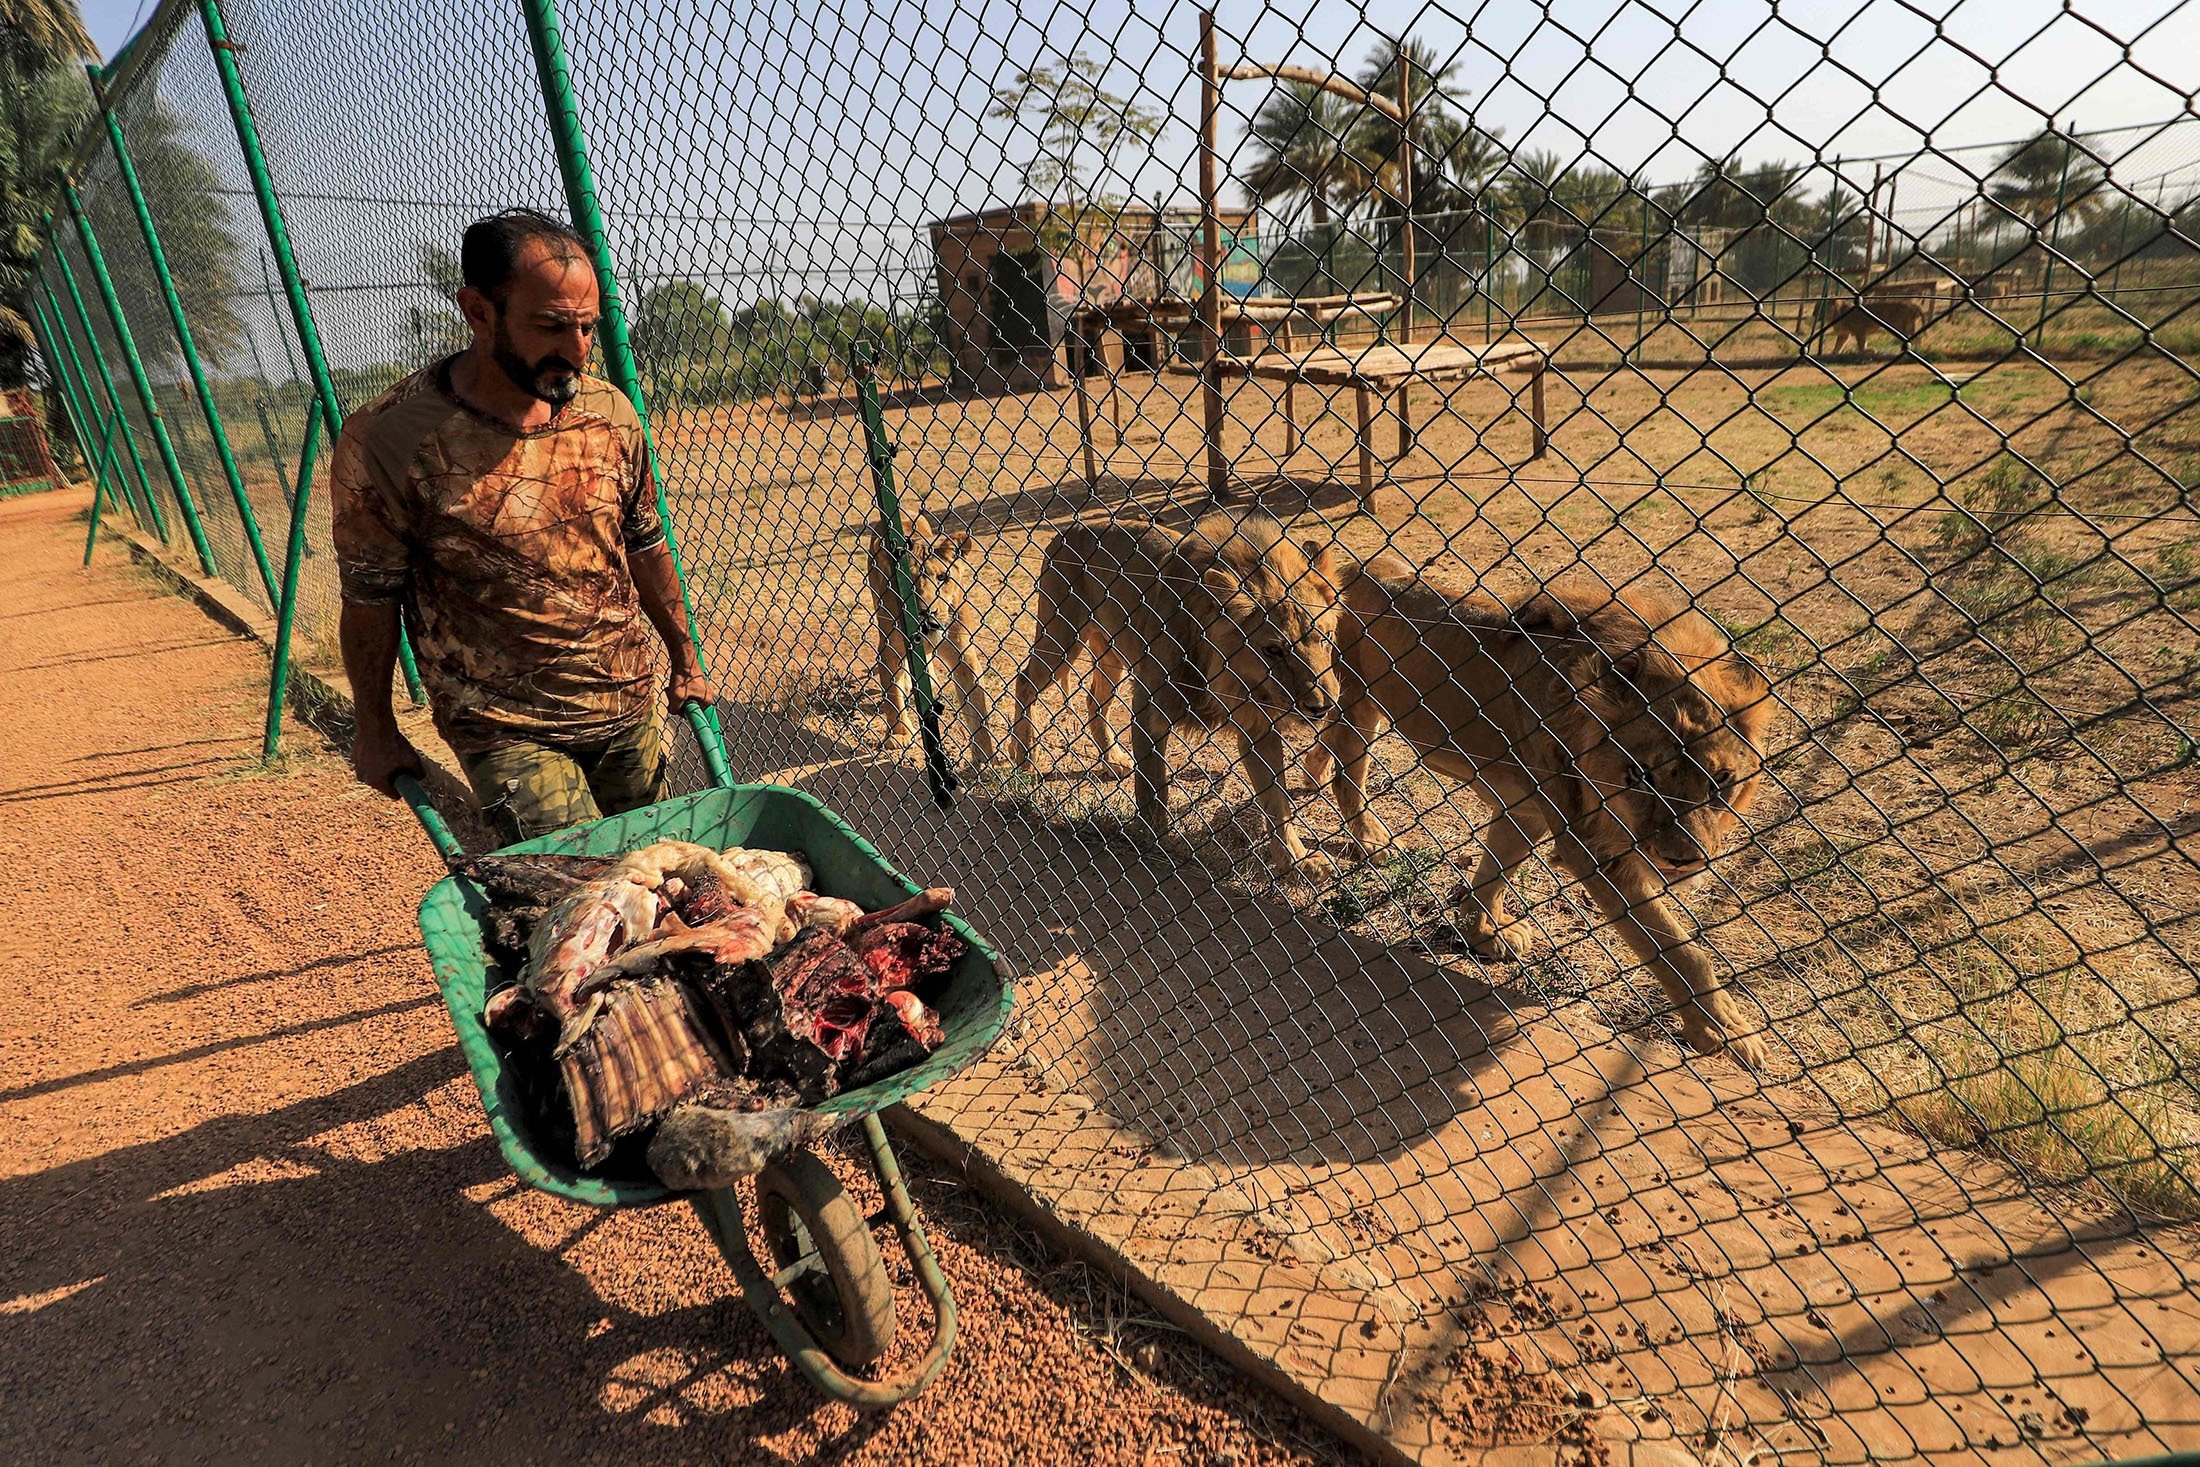 Male lions and female lionesses follow an animal keeper carrying food in a wheelbarrow from behind the fence of an enclosure at the Sudan Animal Rescue center in al-Bageir, south of the capital Khartoum, Sudan, Feb.  28, 2022. (AFP Photo)